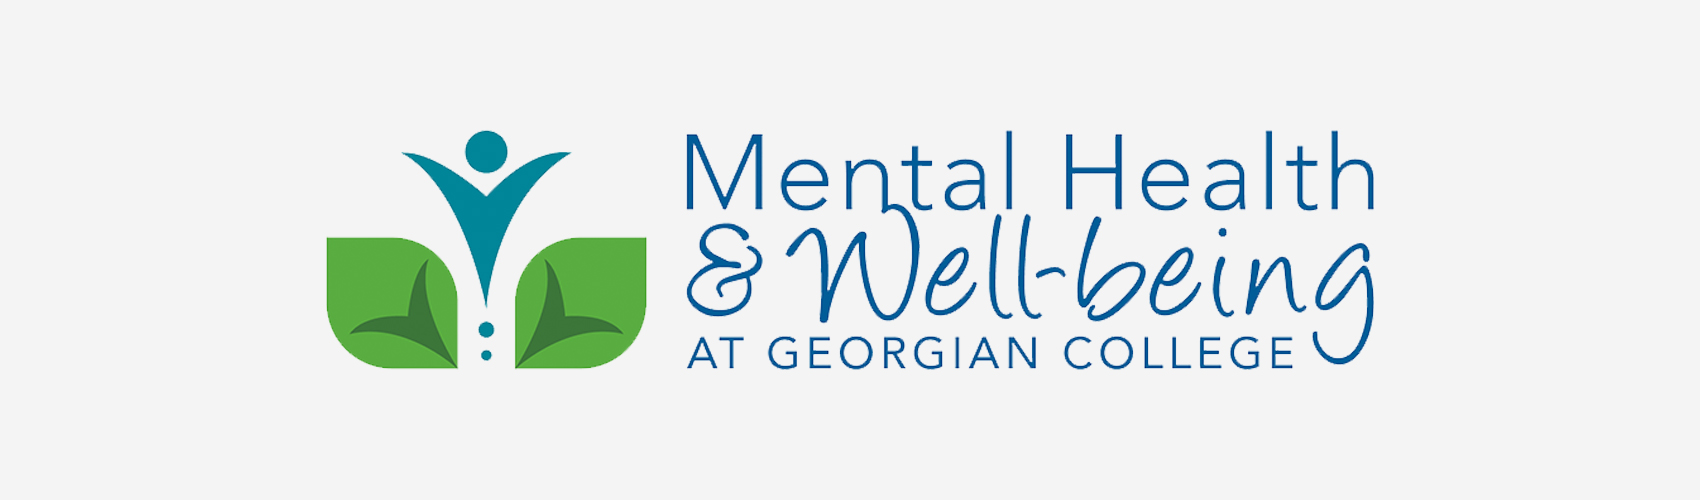 Mental Health and Well-being at Georgian College logo